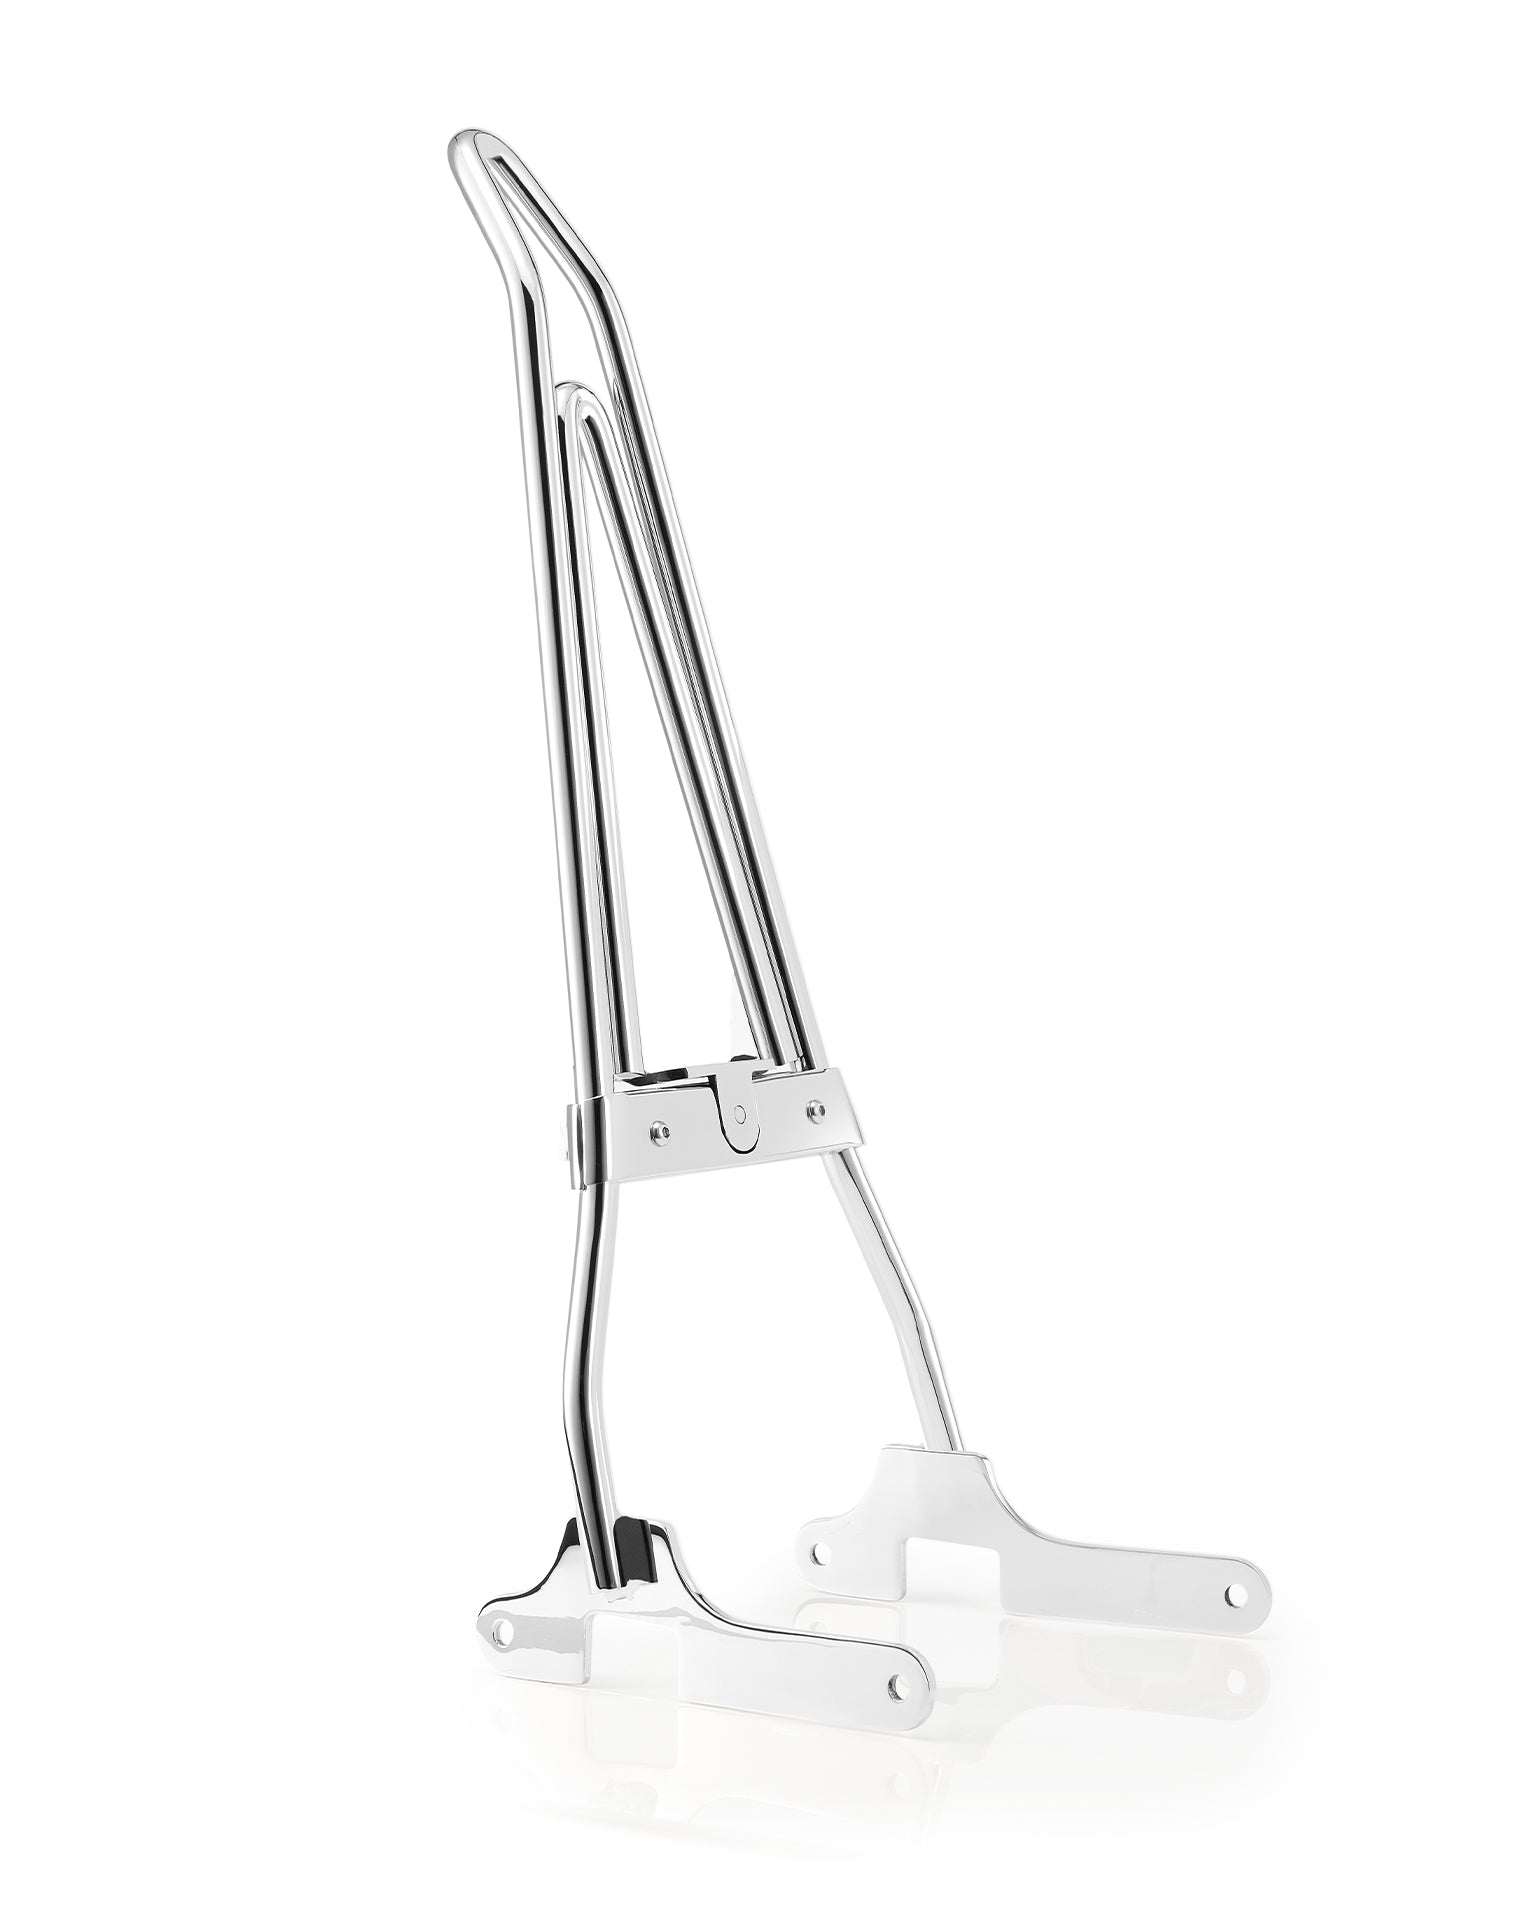 Iron Born Blade 25" Sissy Bar with Foldable Luggage Rack for Harley Sportster 883 Iron XL883N Chrome Main view